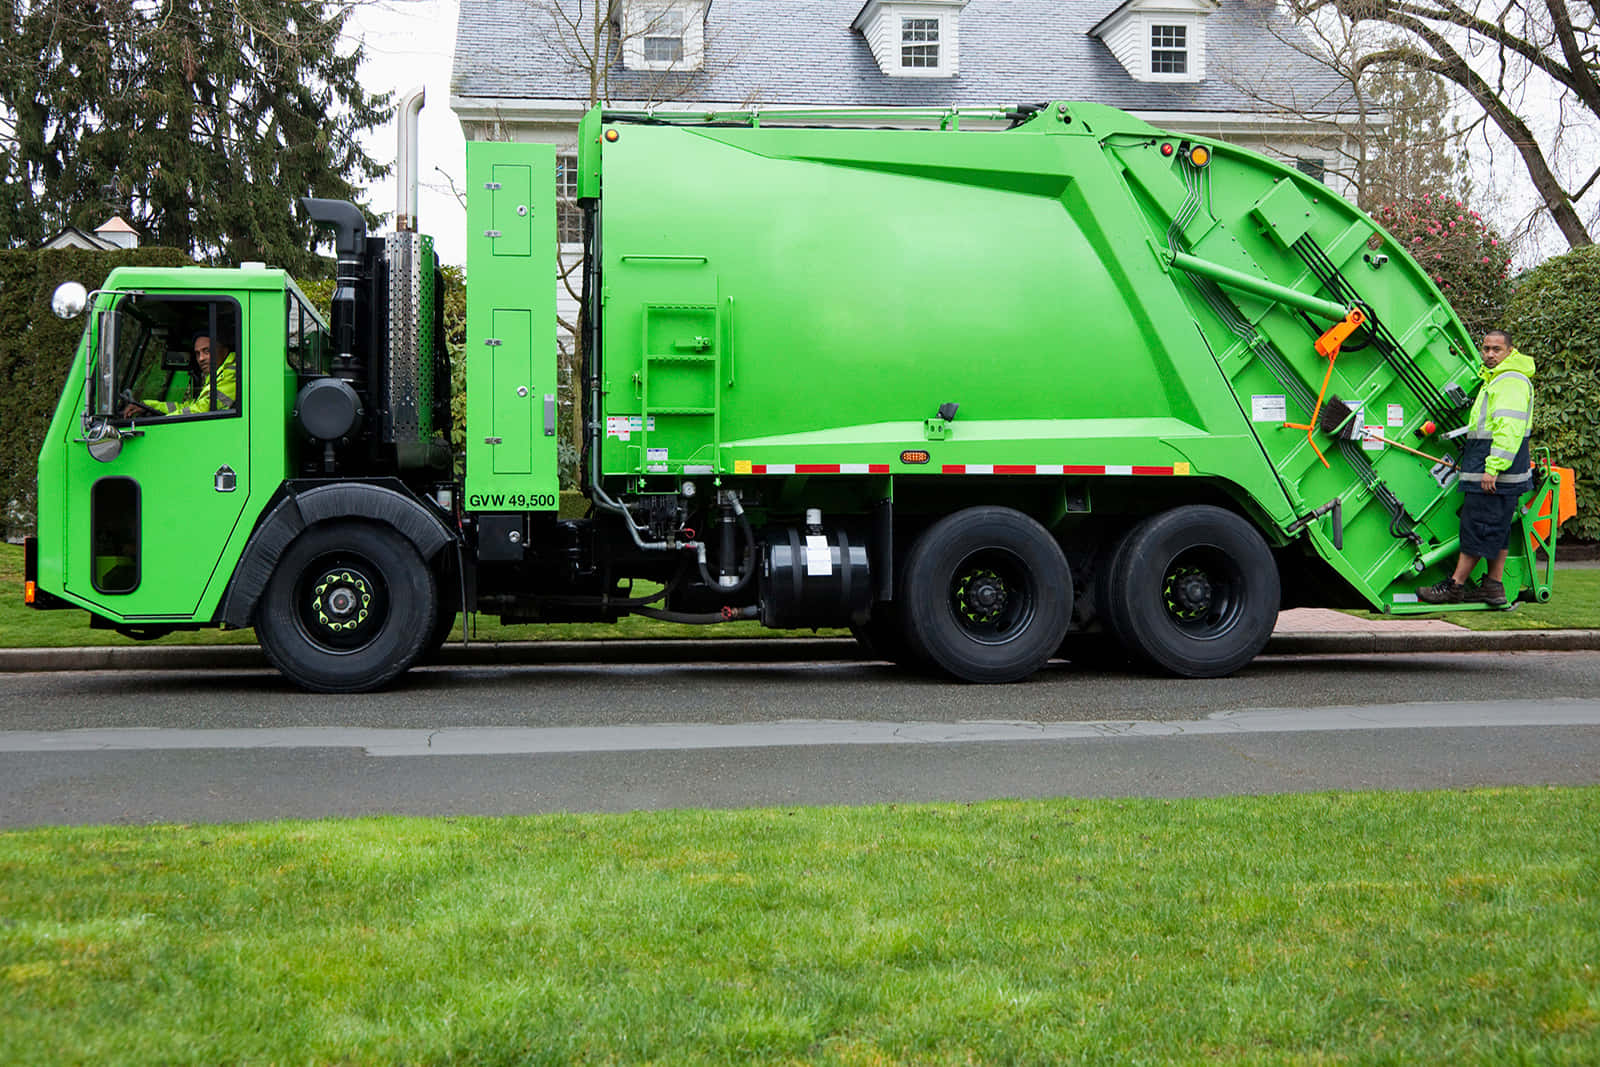 A modern garbage truck collecting trash in an urban environment.